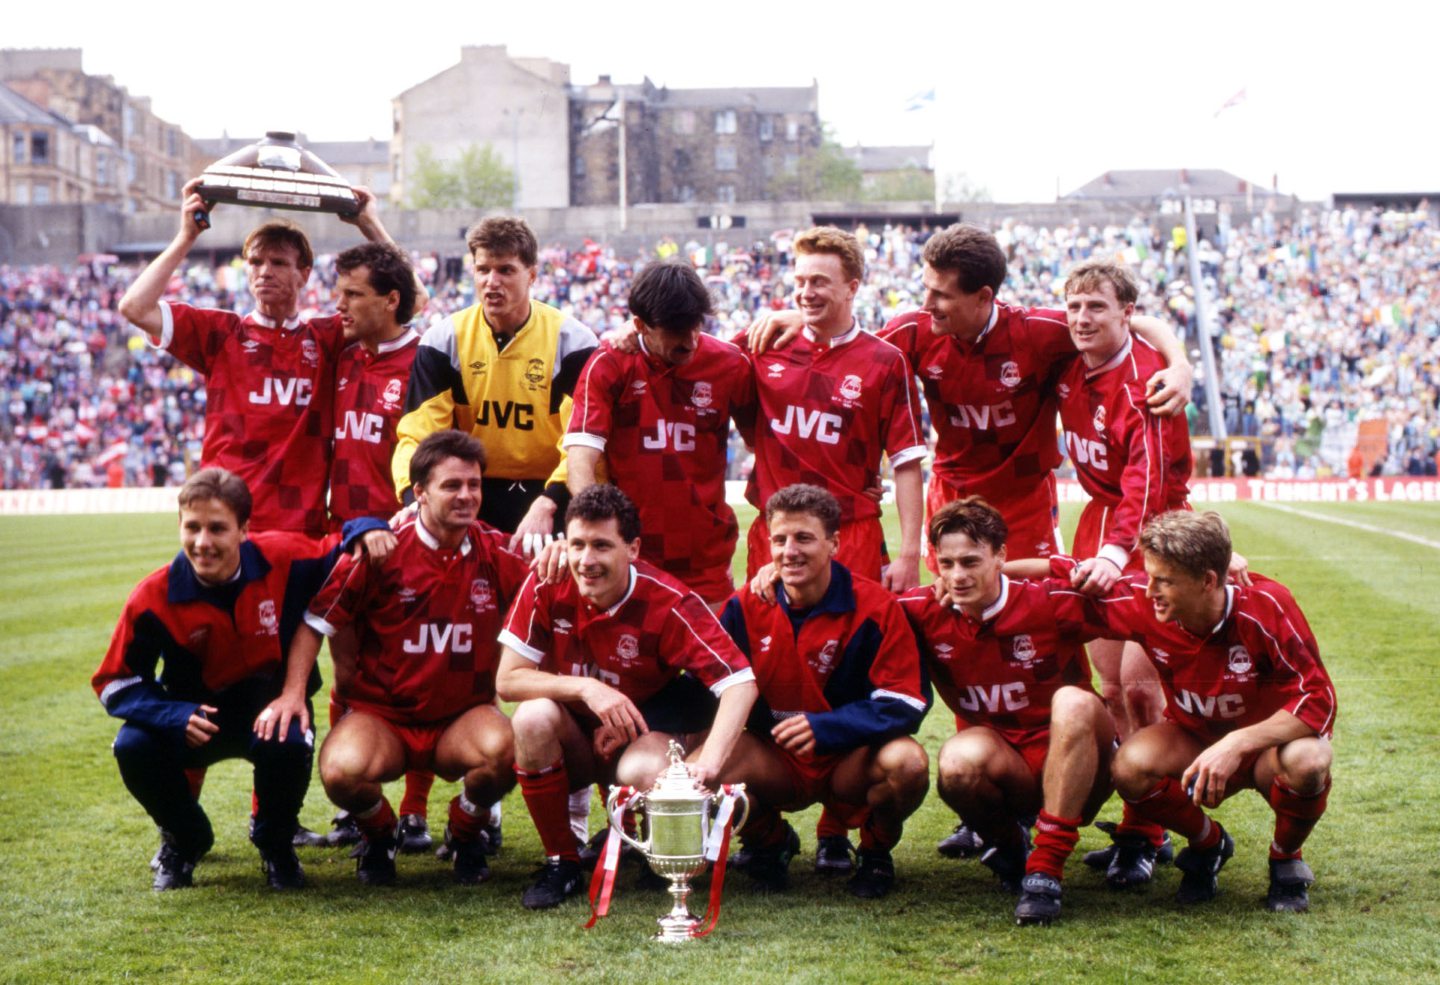 The Aberdeen players celebrate winning the Scottish Cup in 1990 to complete the double that seaaon.Back row from left: Alex McLeish, Hans Gillhaus, Theo Snelders, Robert Connor, Gregg Watson, Brian Irvine, Stuart McKimmie. Front row from left: Eoin Jess, Charlie Nicholas, Jim Bett, Paul Mason, David Robertson and Brian Grant. Image: SNS 